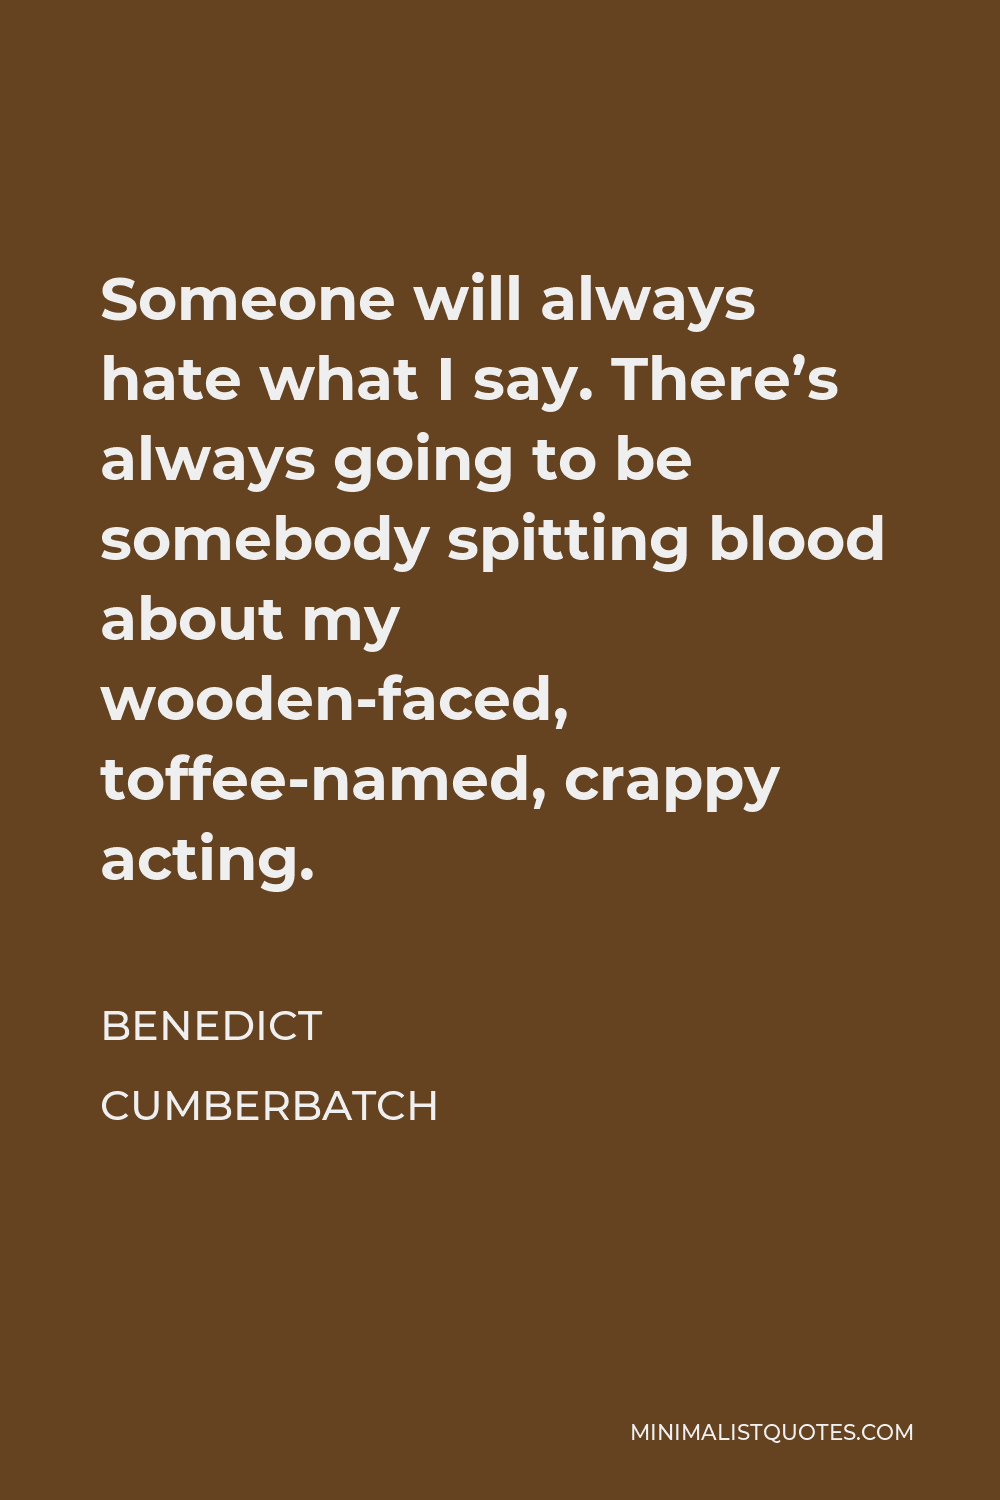 Benedict Cumberbatch Quote - Someone will always hate what I say. There’s always going to be somebody spitting blood about my wooden-faced, toffee-named, crappy acting.